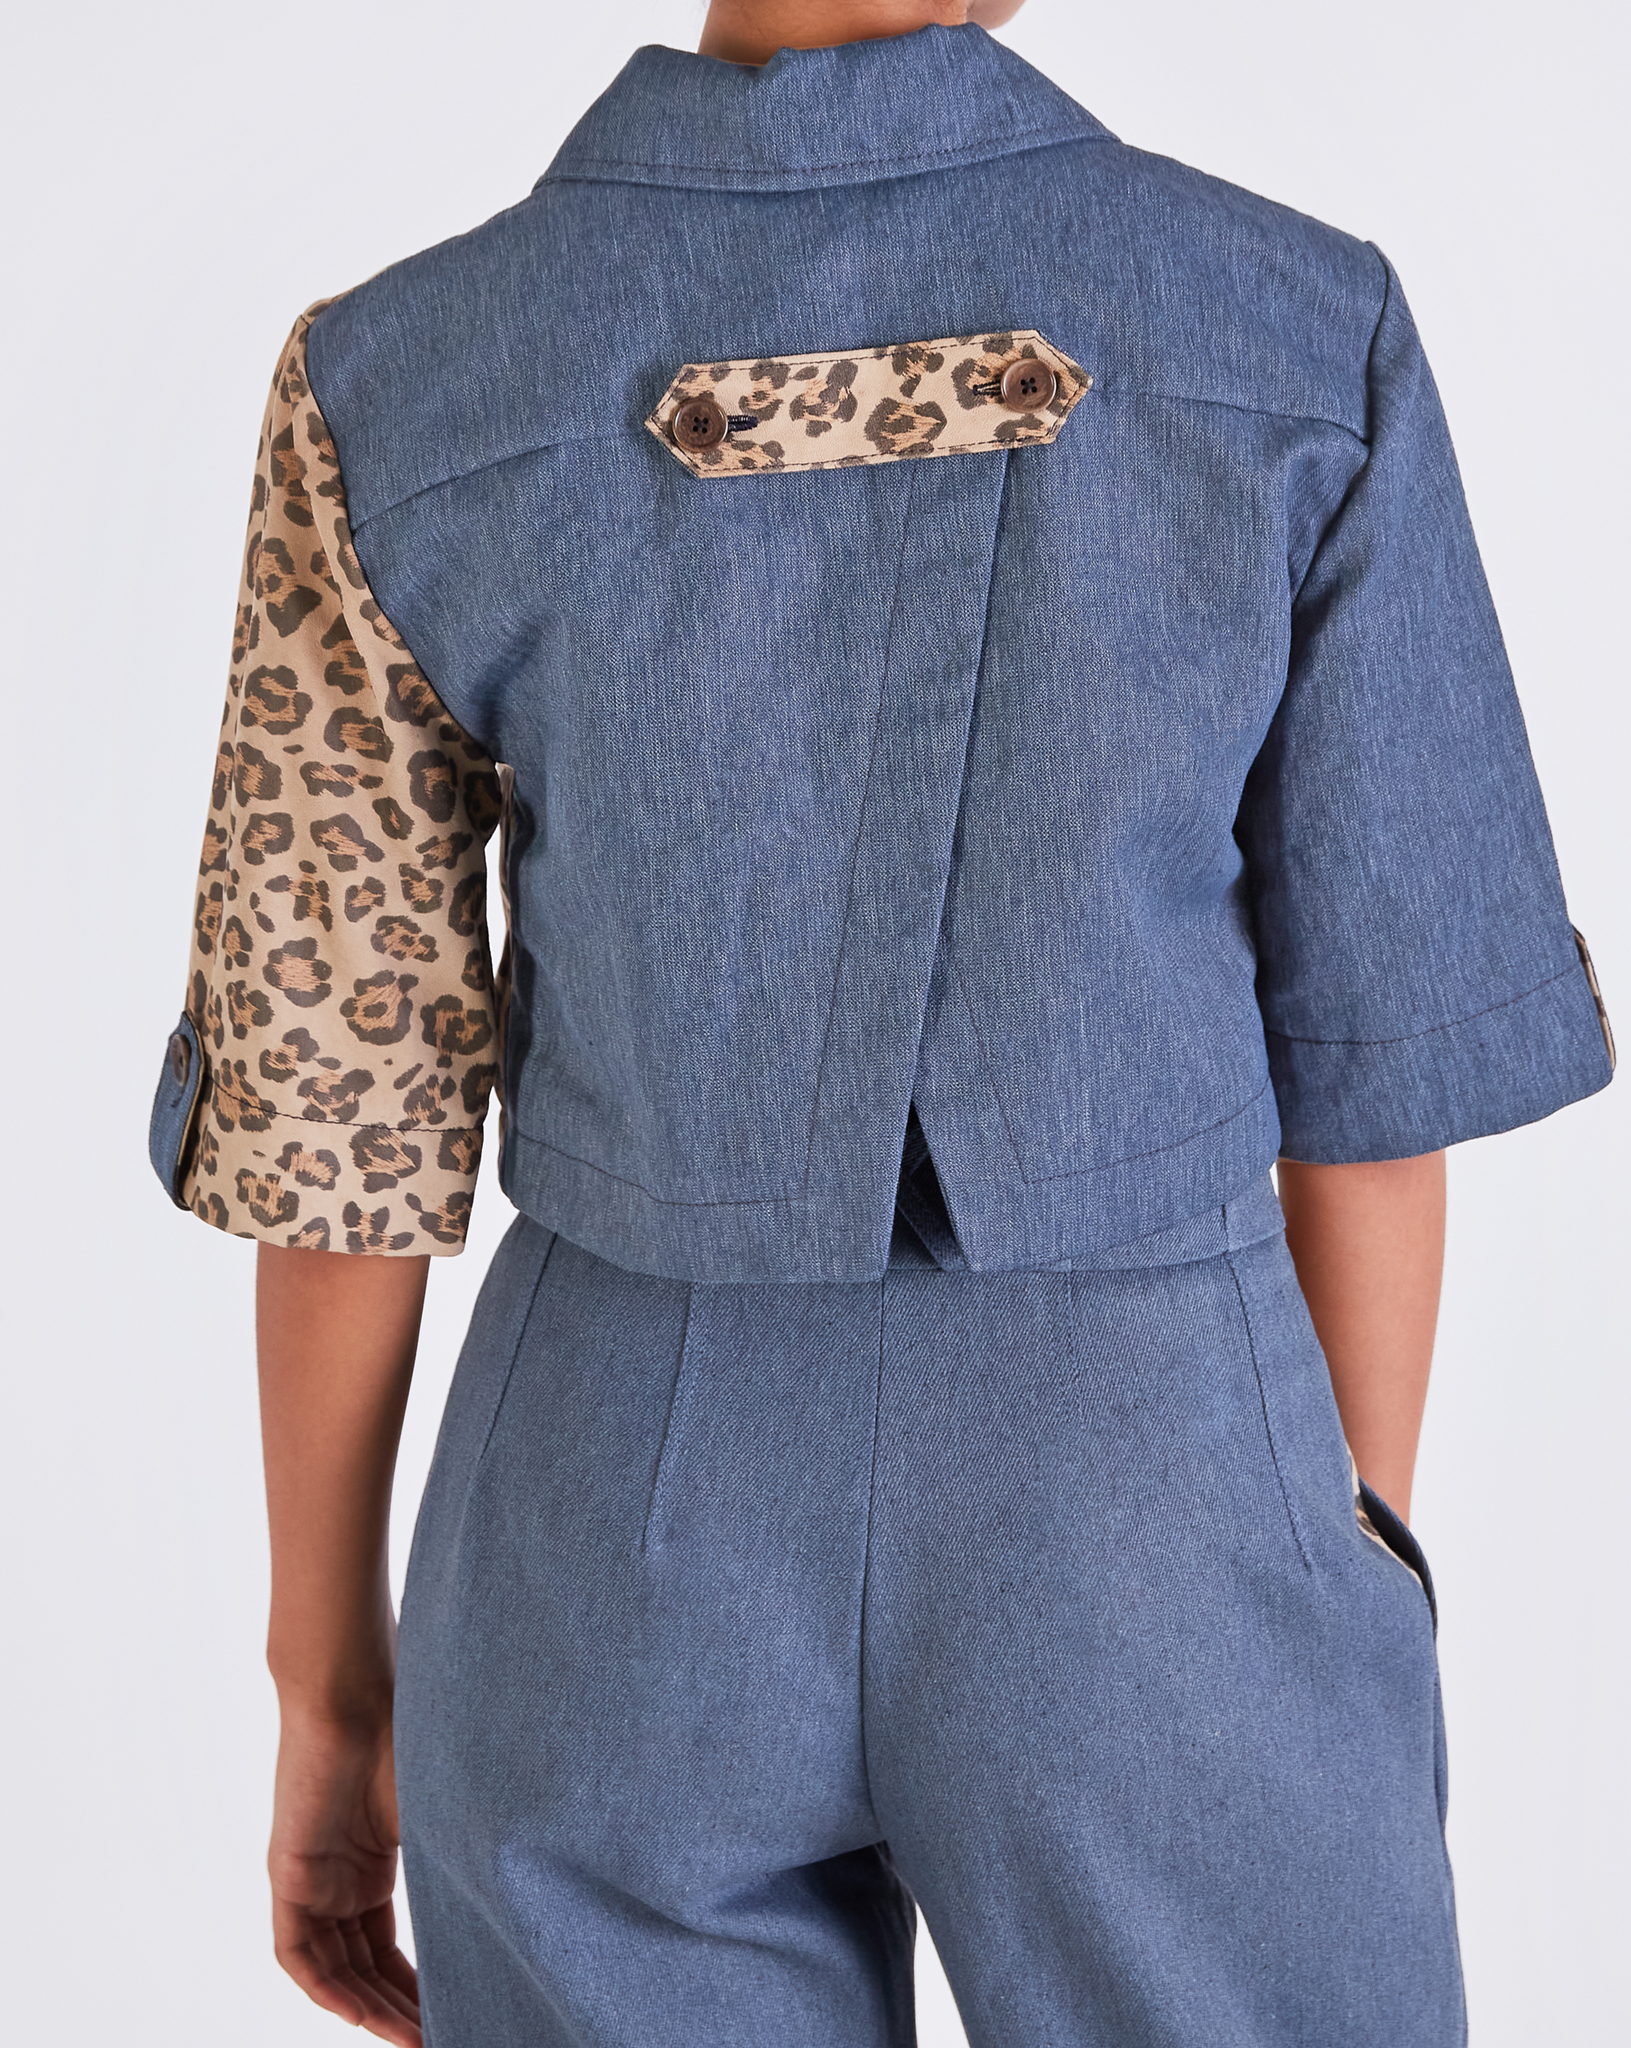 Coco CROPPED BUTTON THROUGH TOP - DENIM / LEATHER